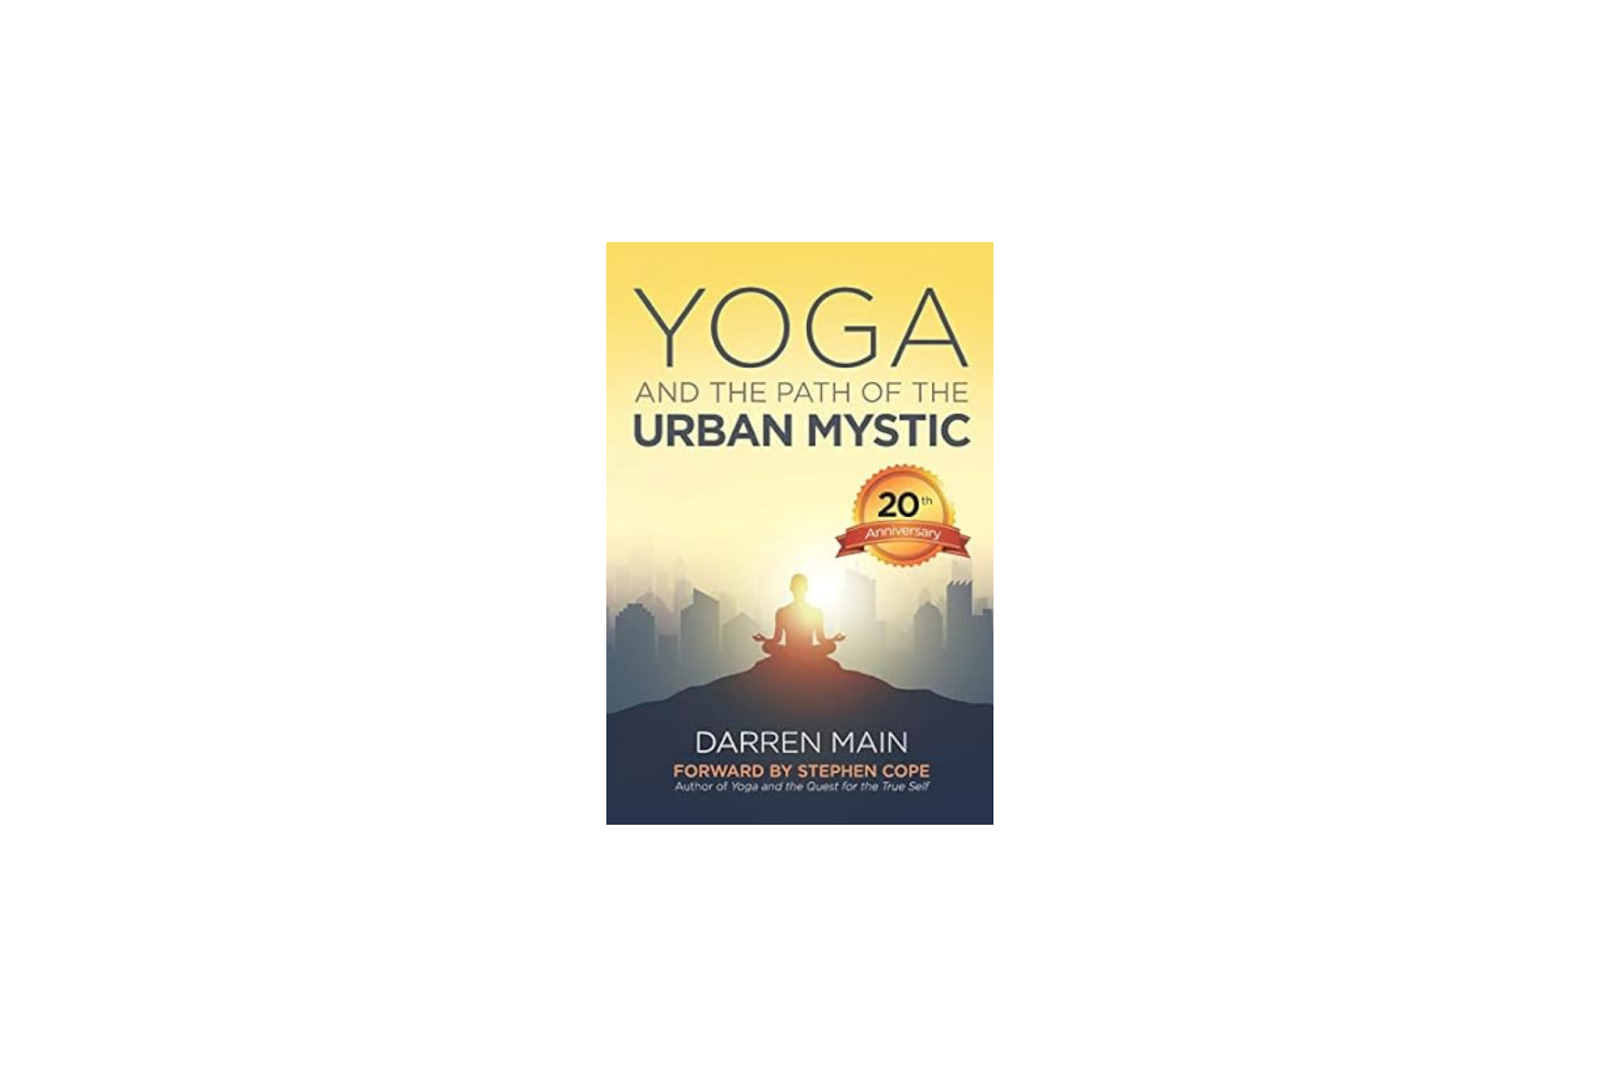  Yoga and The Path of Urban Mystic by Darren Main